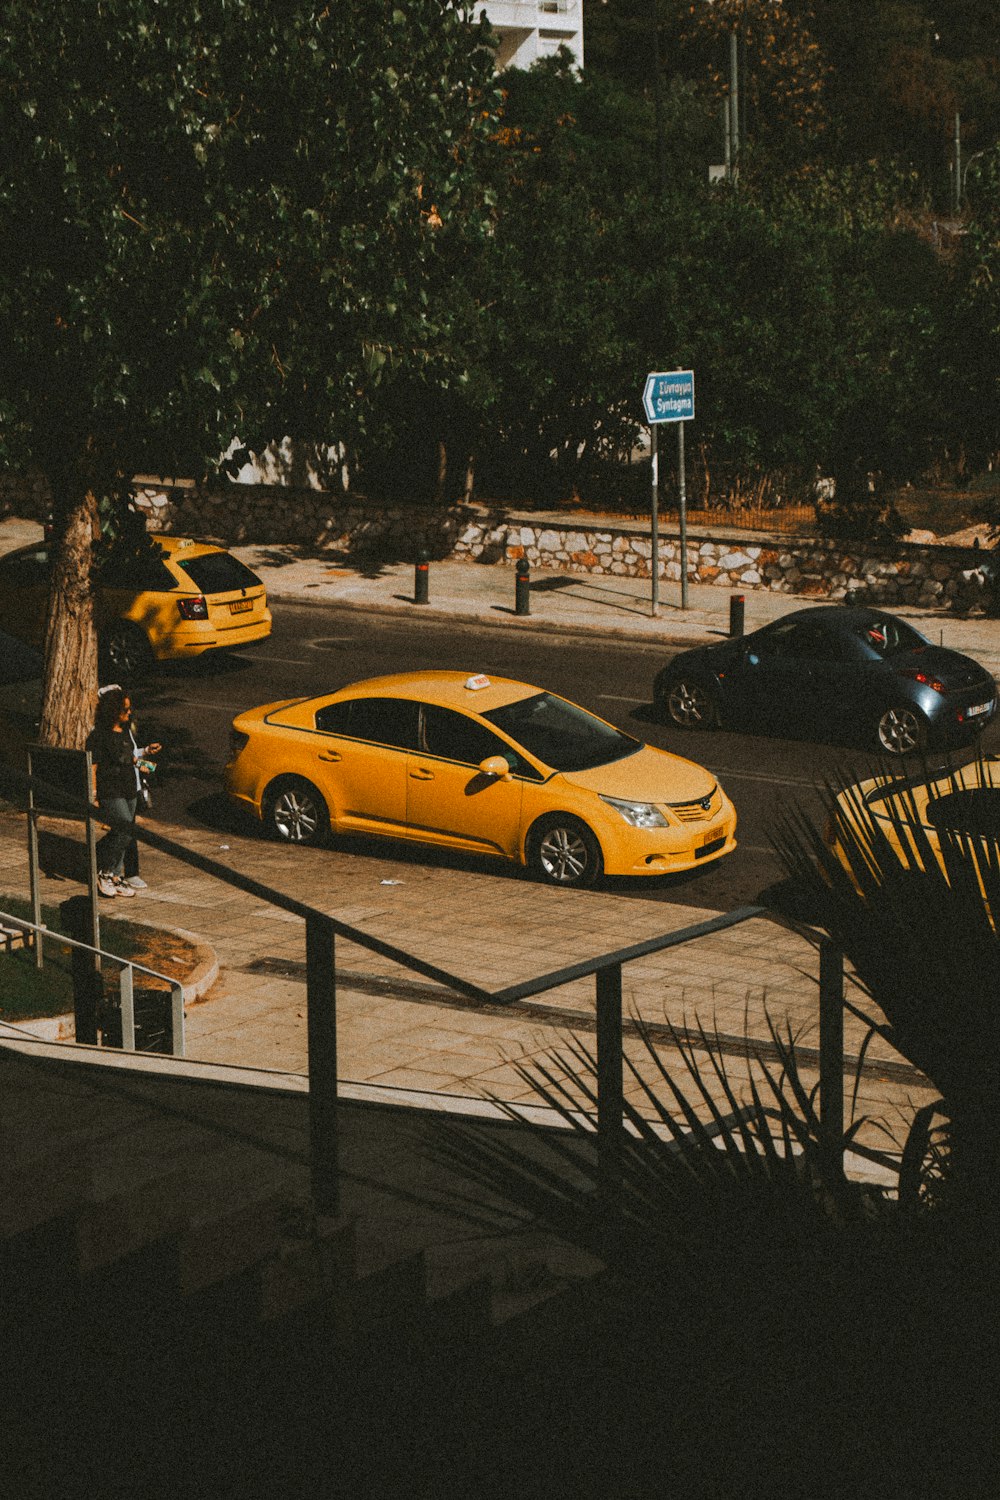 a yellow car is parked in a parking lot